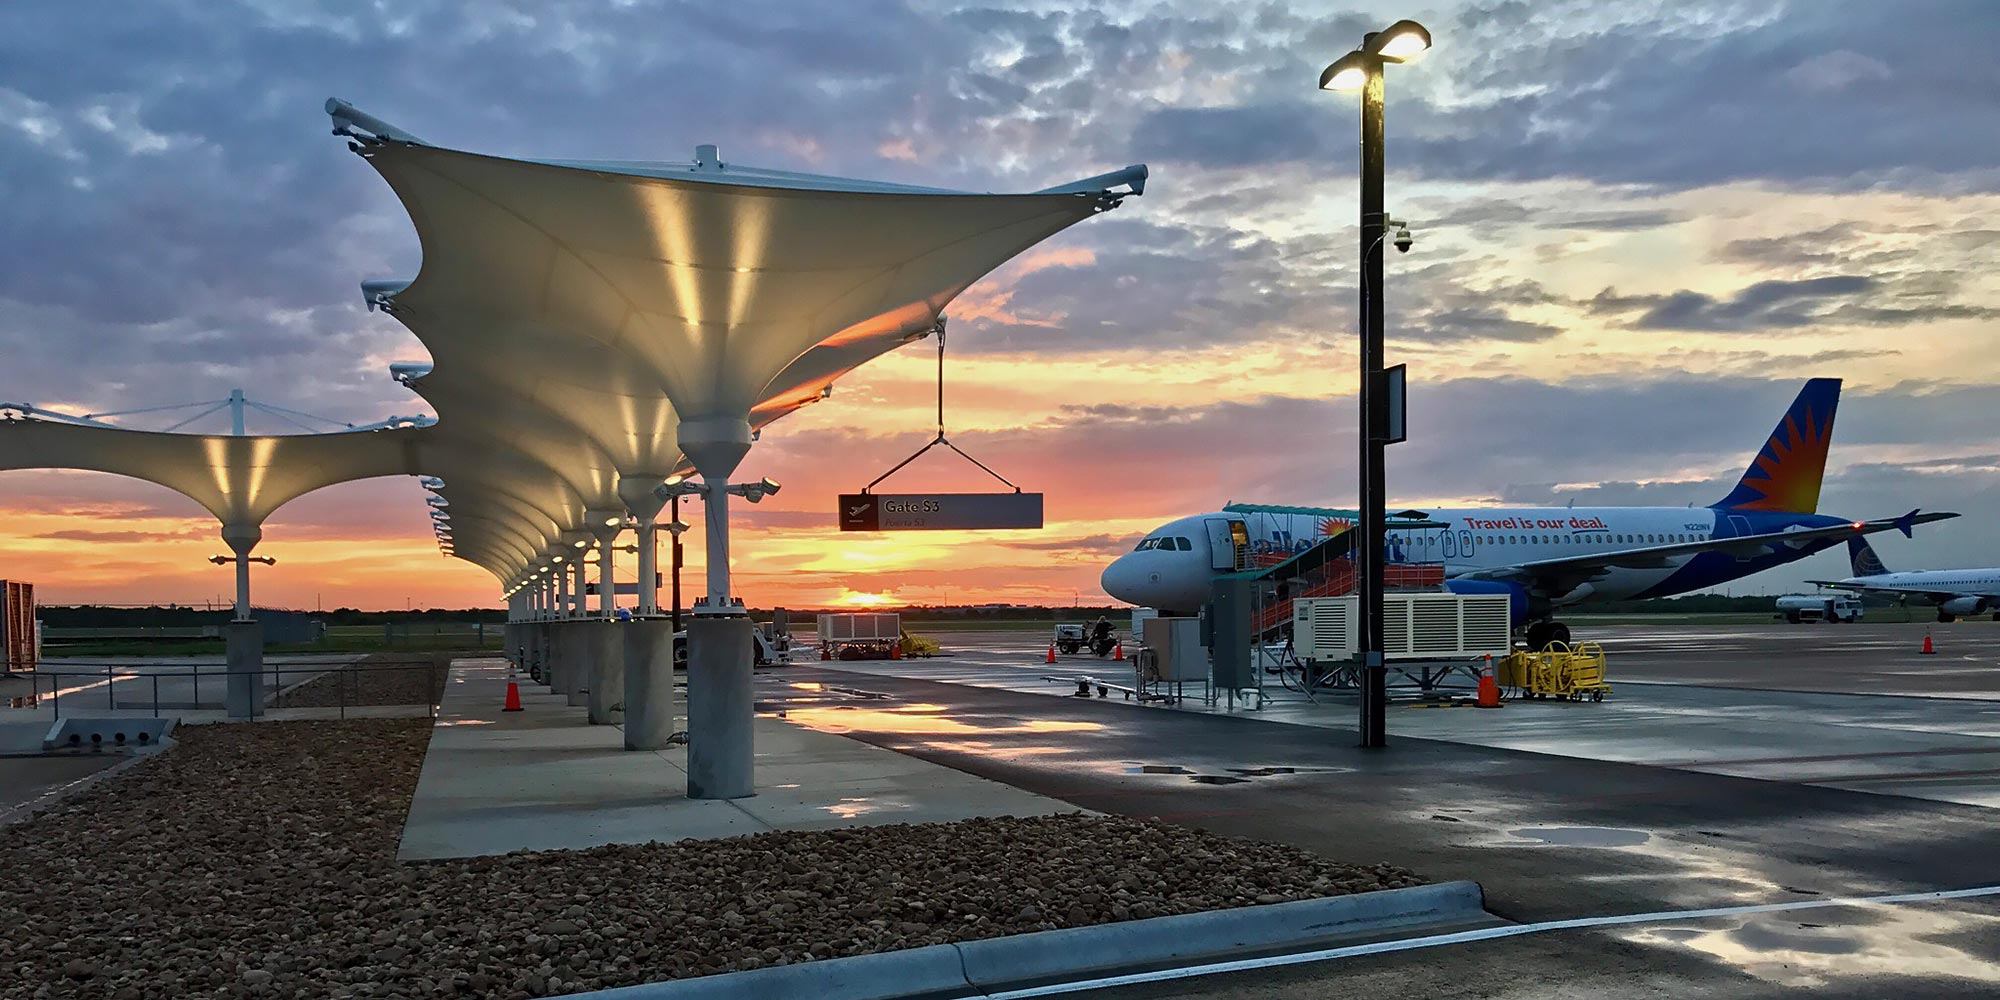 austin bergstrom international airport south terminal fabric structures